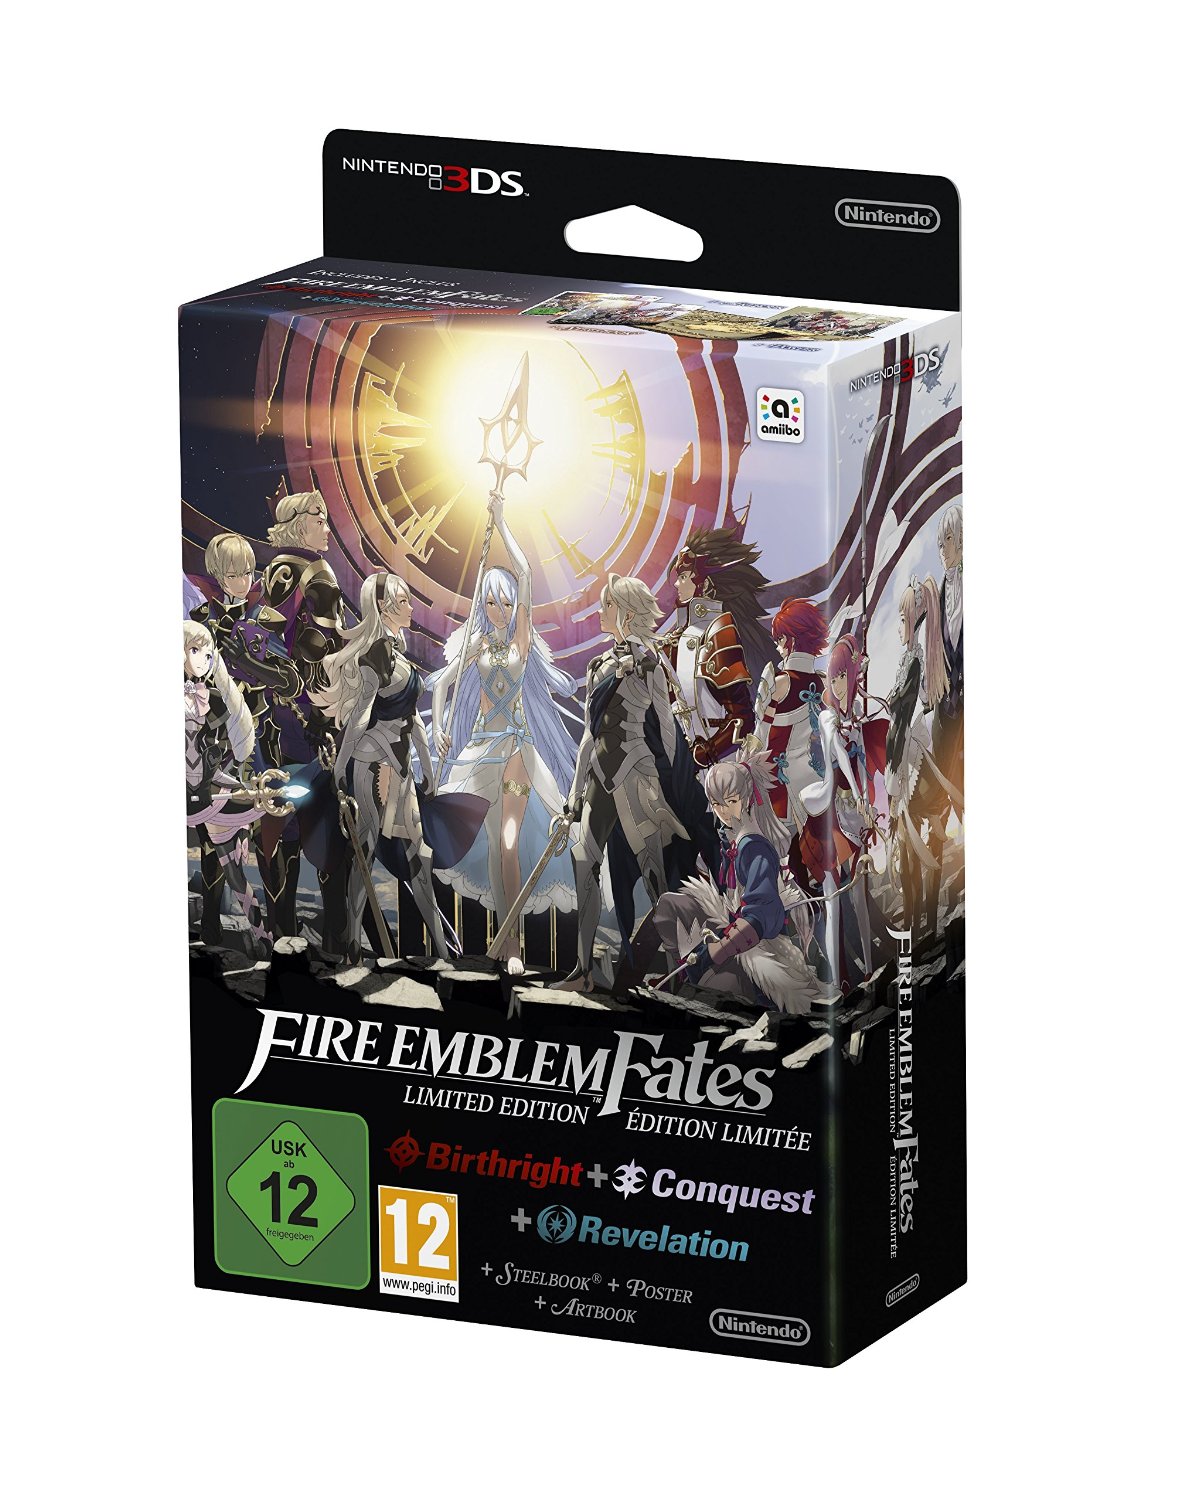 Fire emblem fates special edition in stock - equityjulu